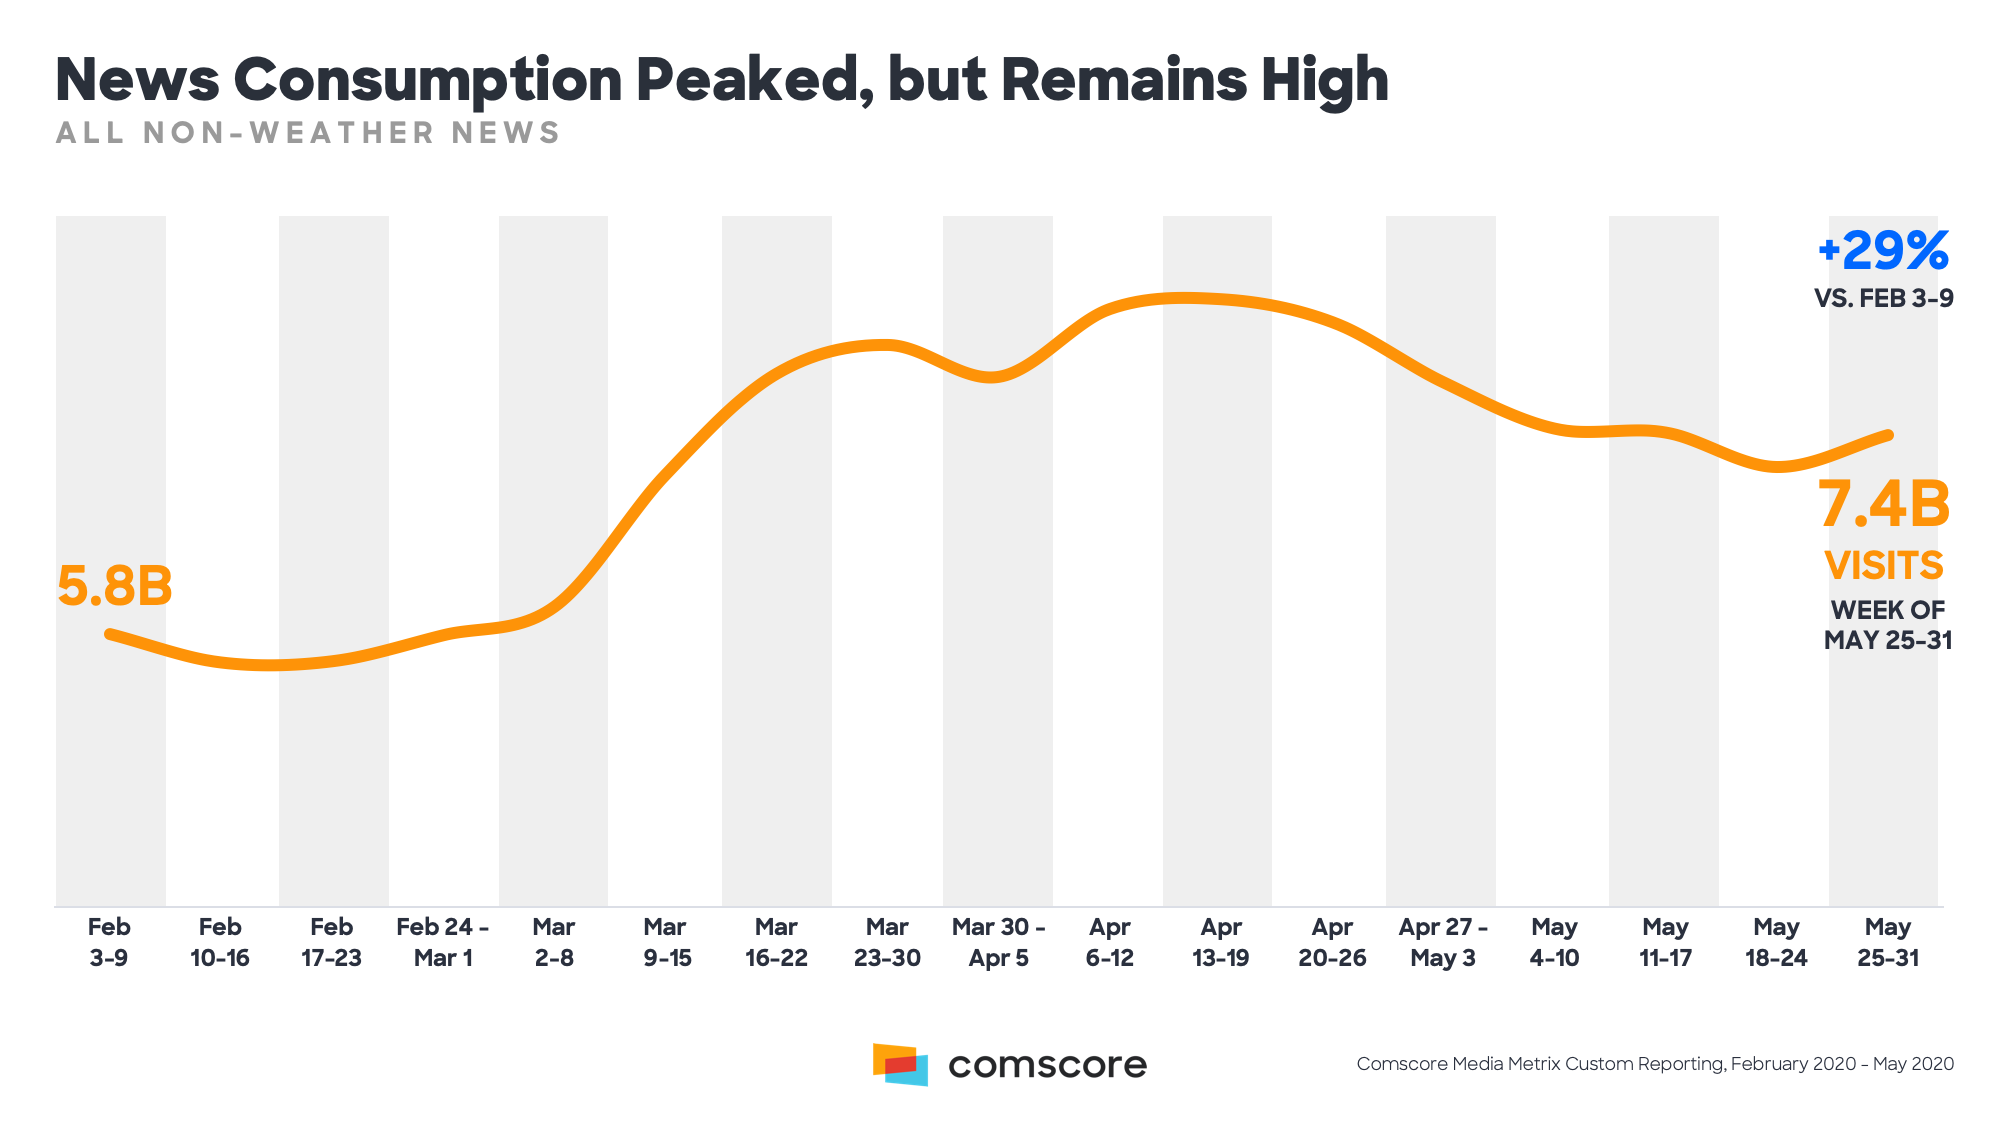 News Consumption Peaked but Remains High